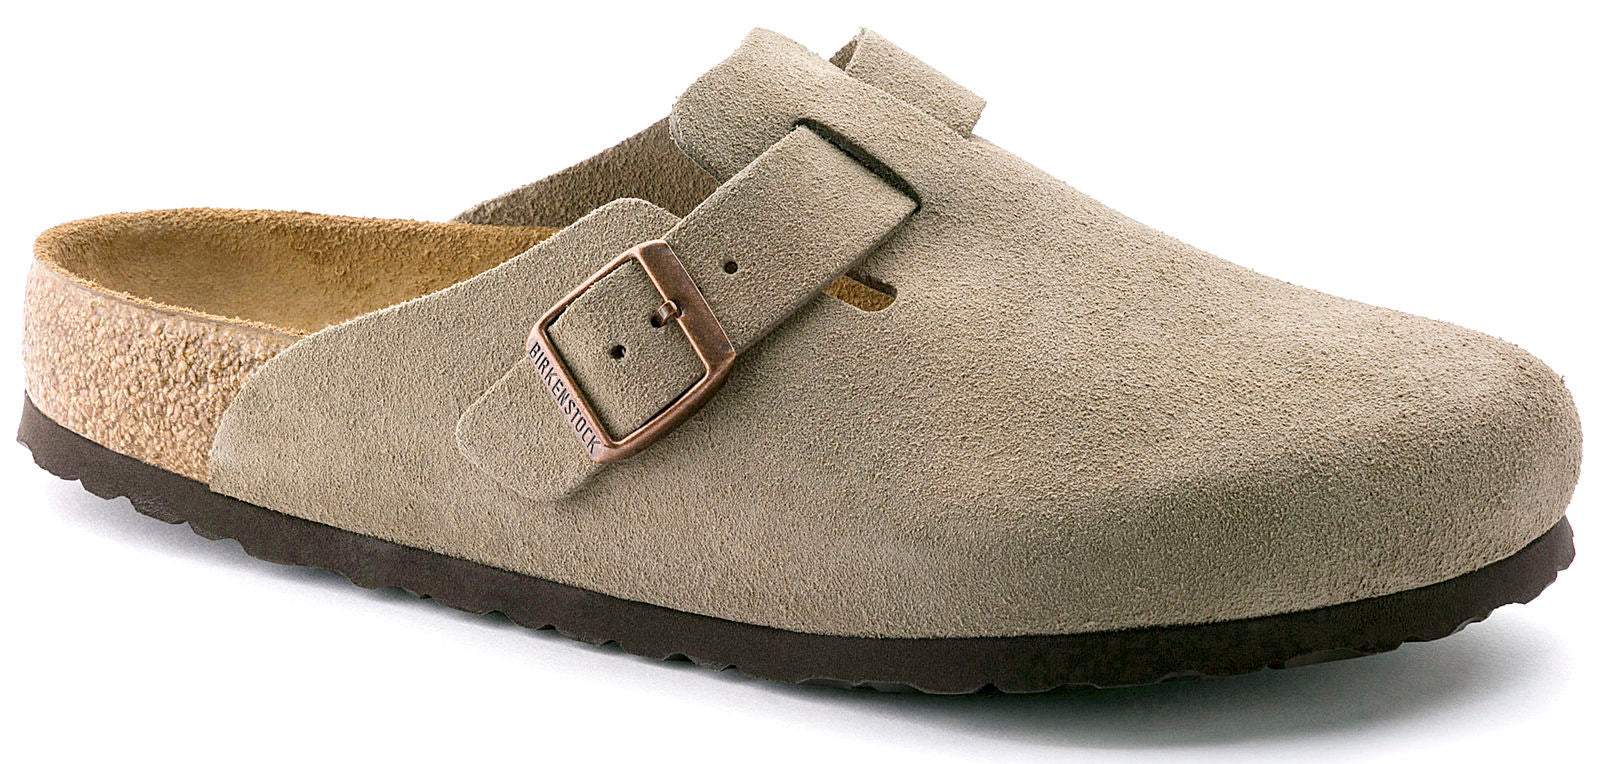 Birkenstock Boston Soft Footbed Suede Leather Mules - Unisex